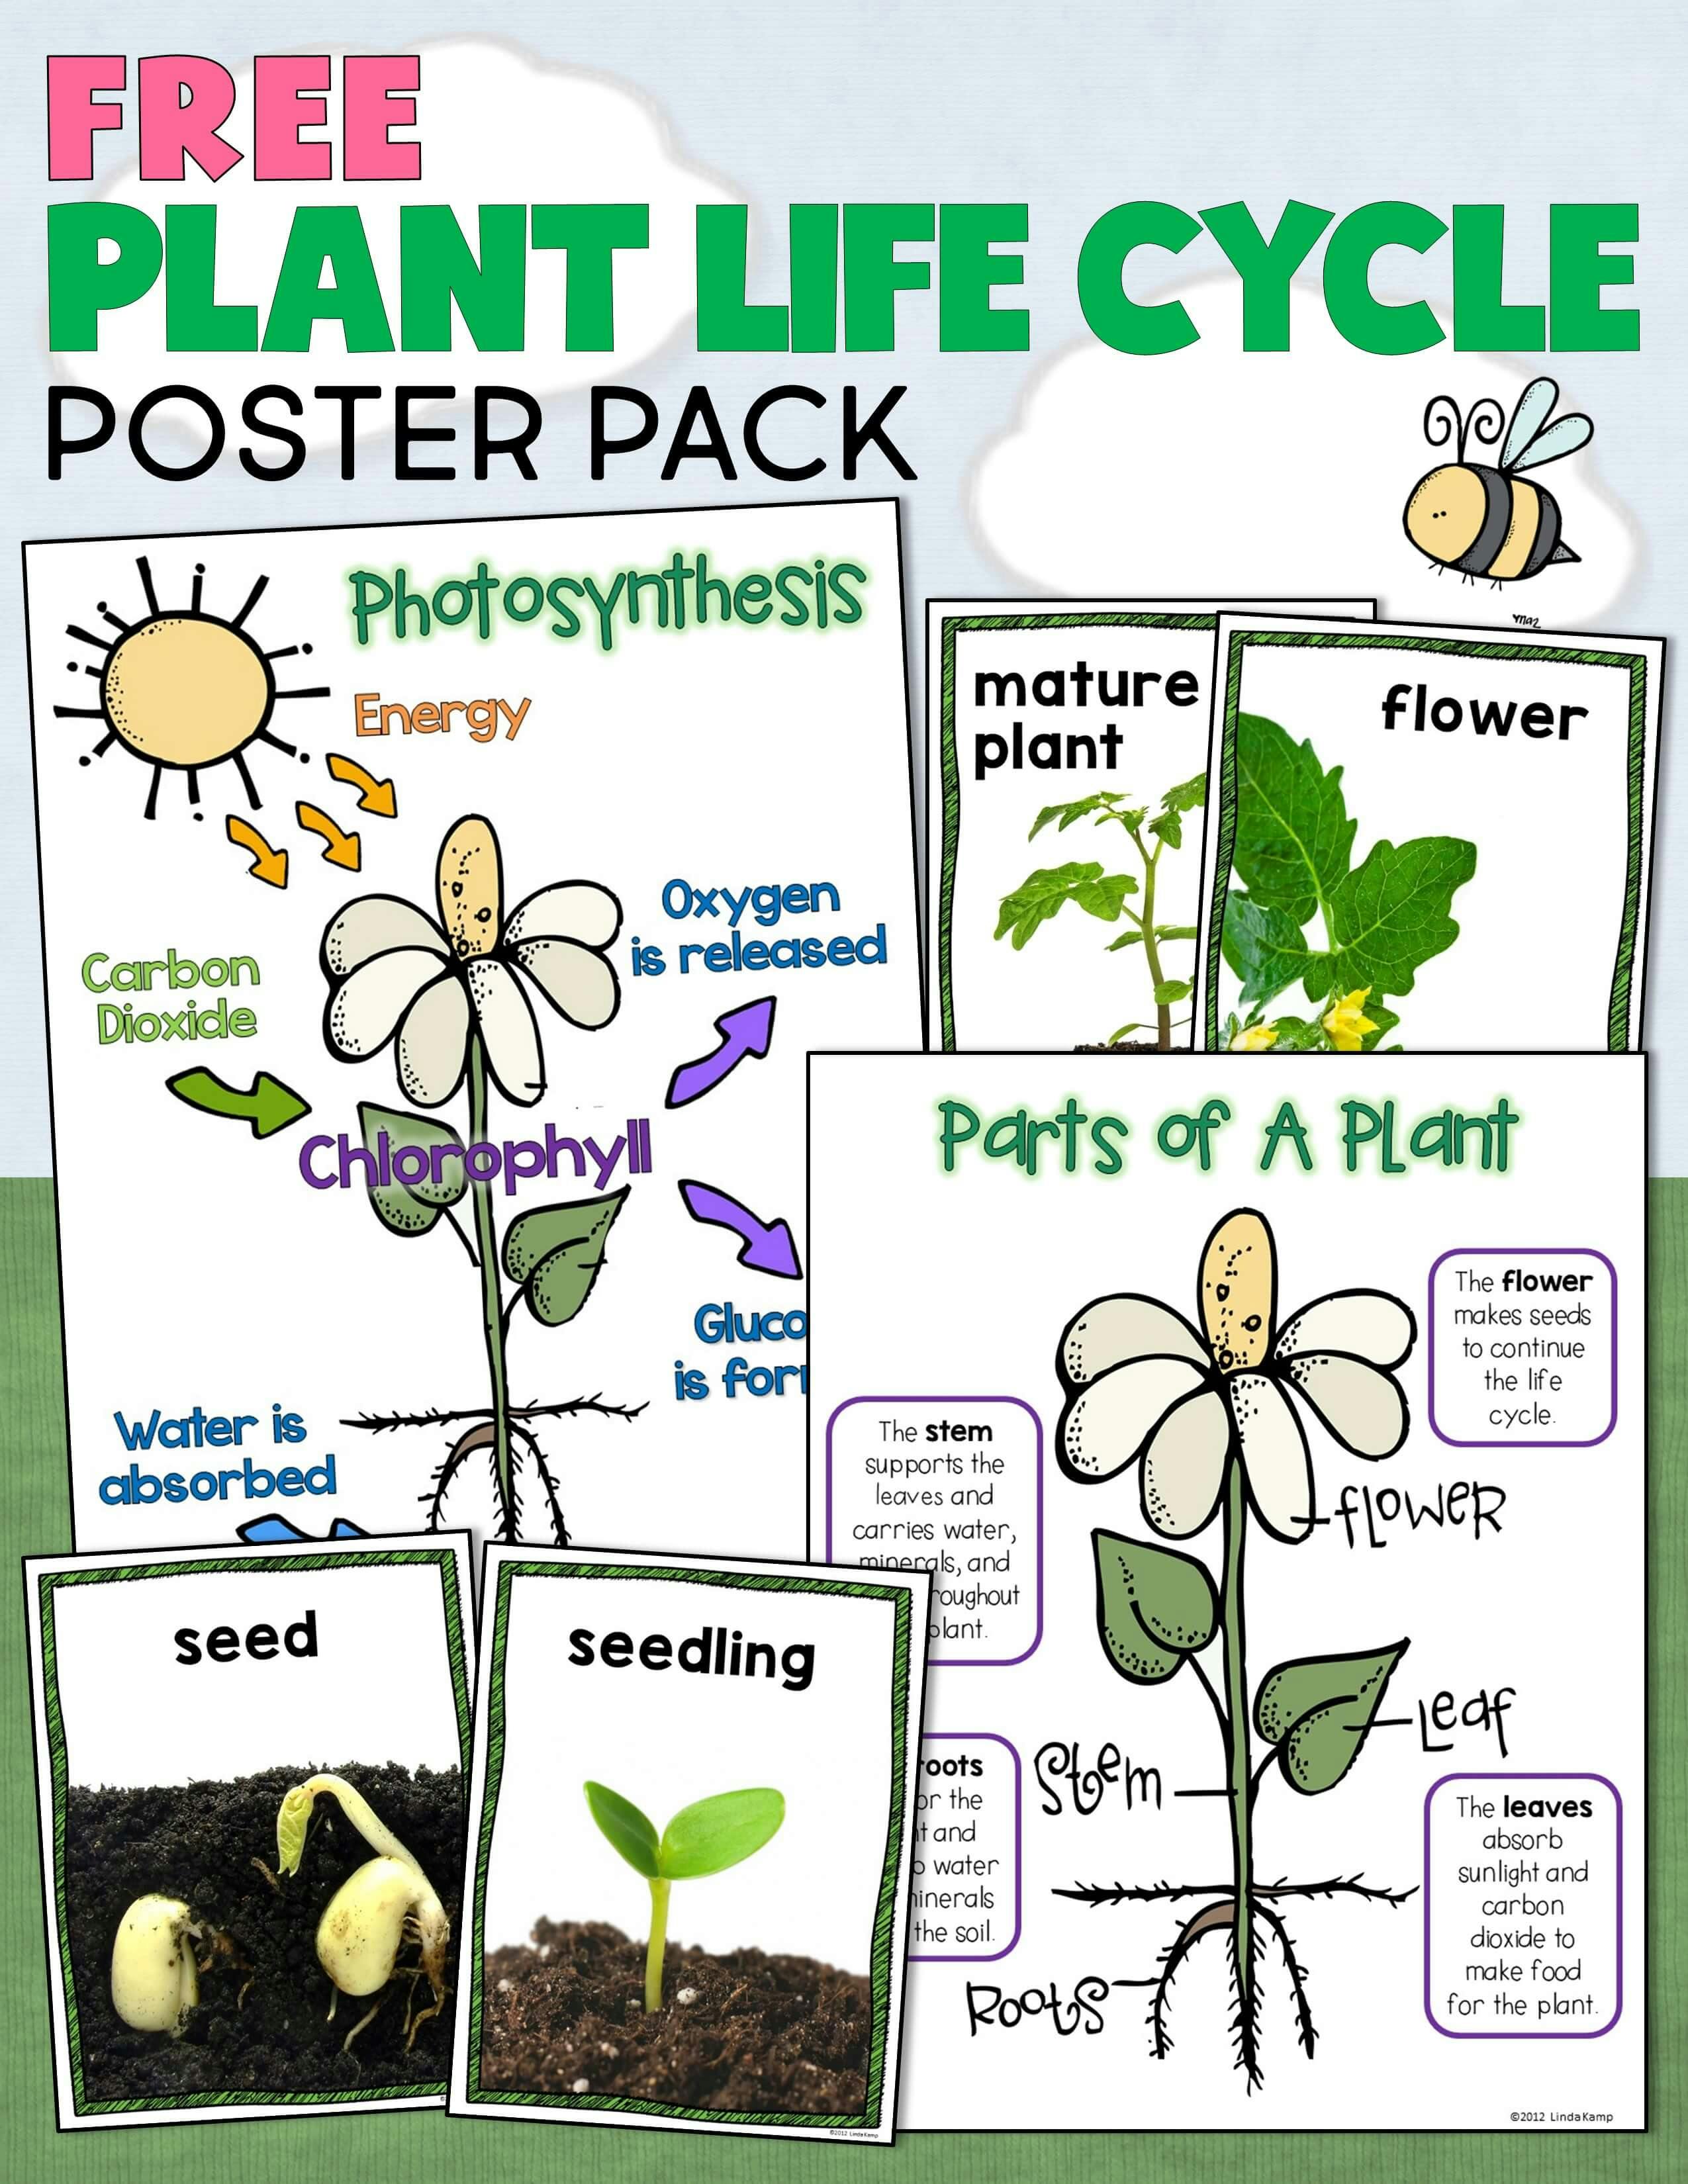 Plant Life Cycle Activities-Fun, Hands-on Science for Kids